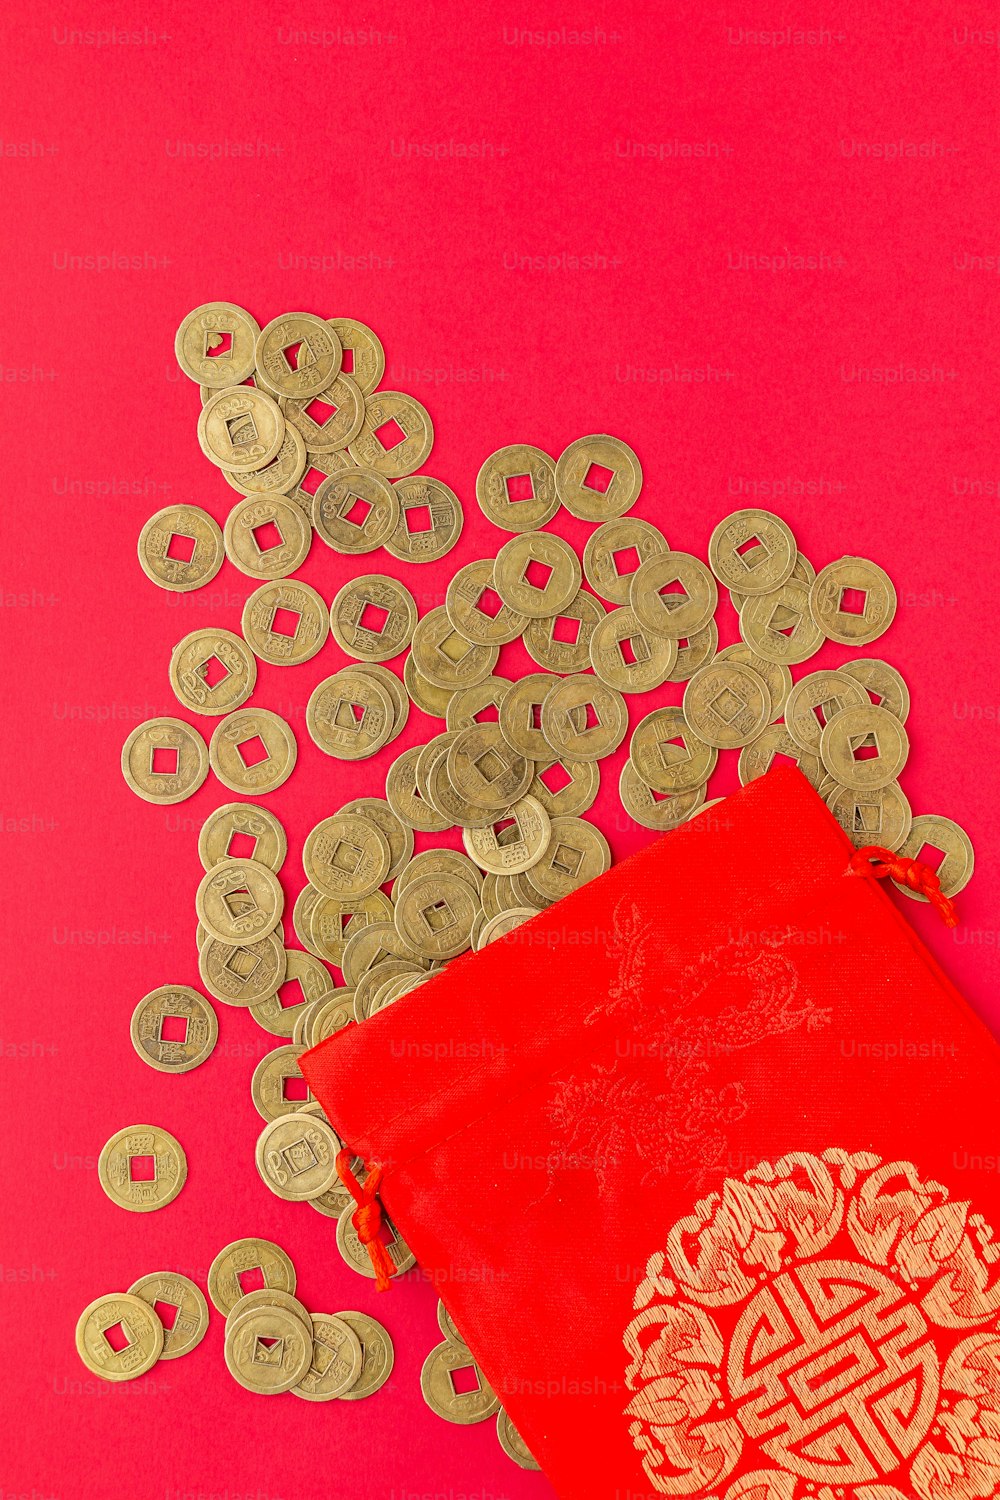 a red book surrounded by gold coins on a pink background